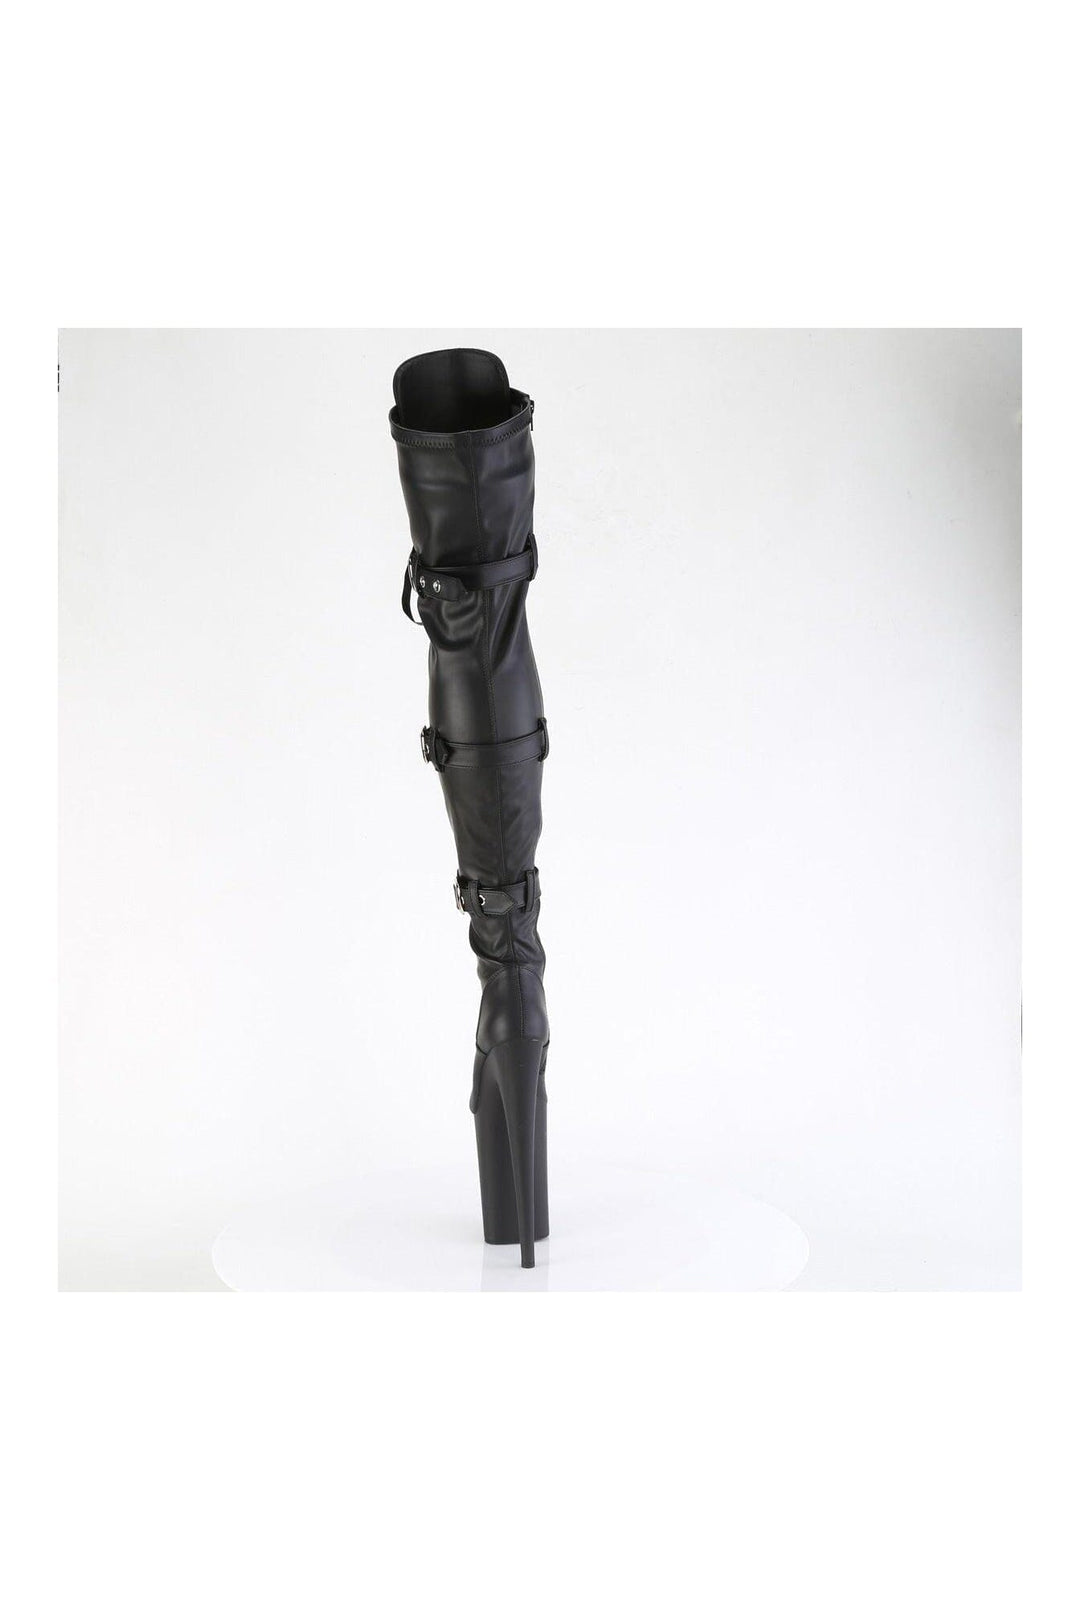 Pleaser Thigh Boots Platform Stripper Shoes | Buy at Sexyshoes.com